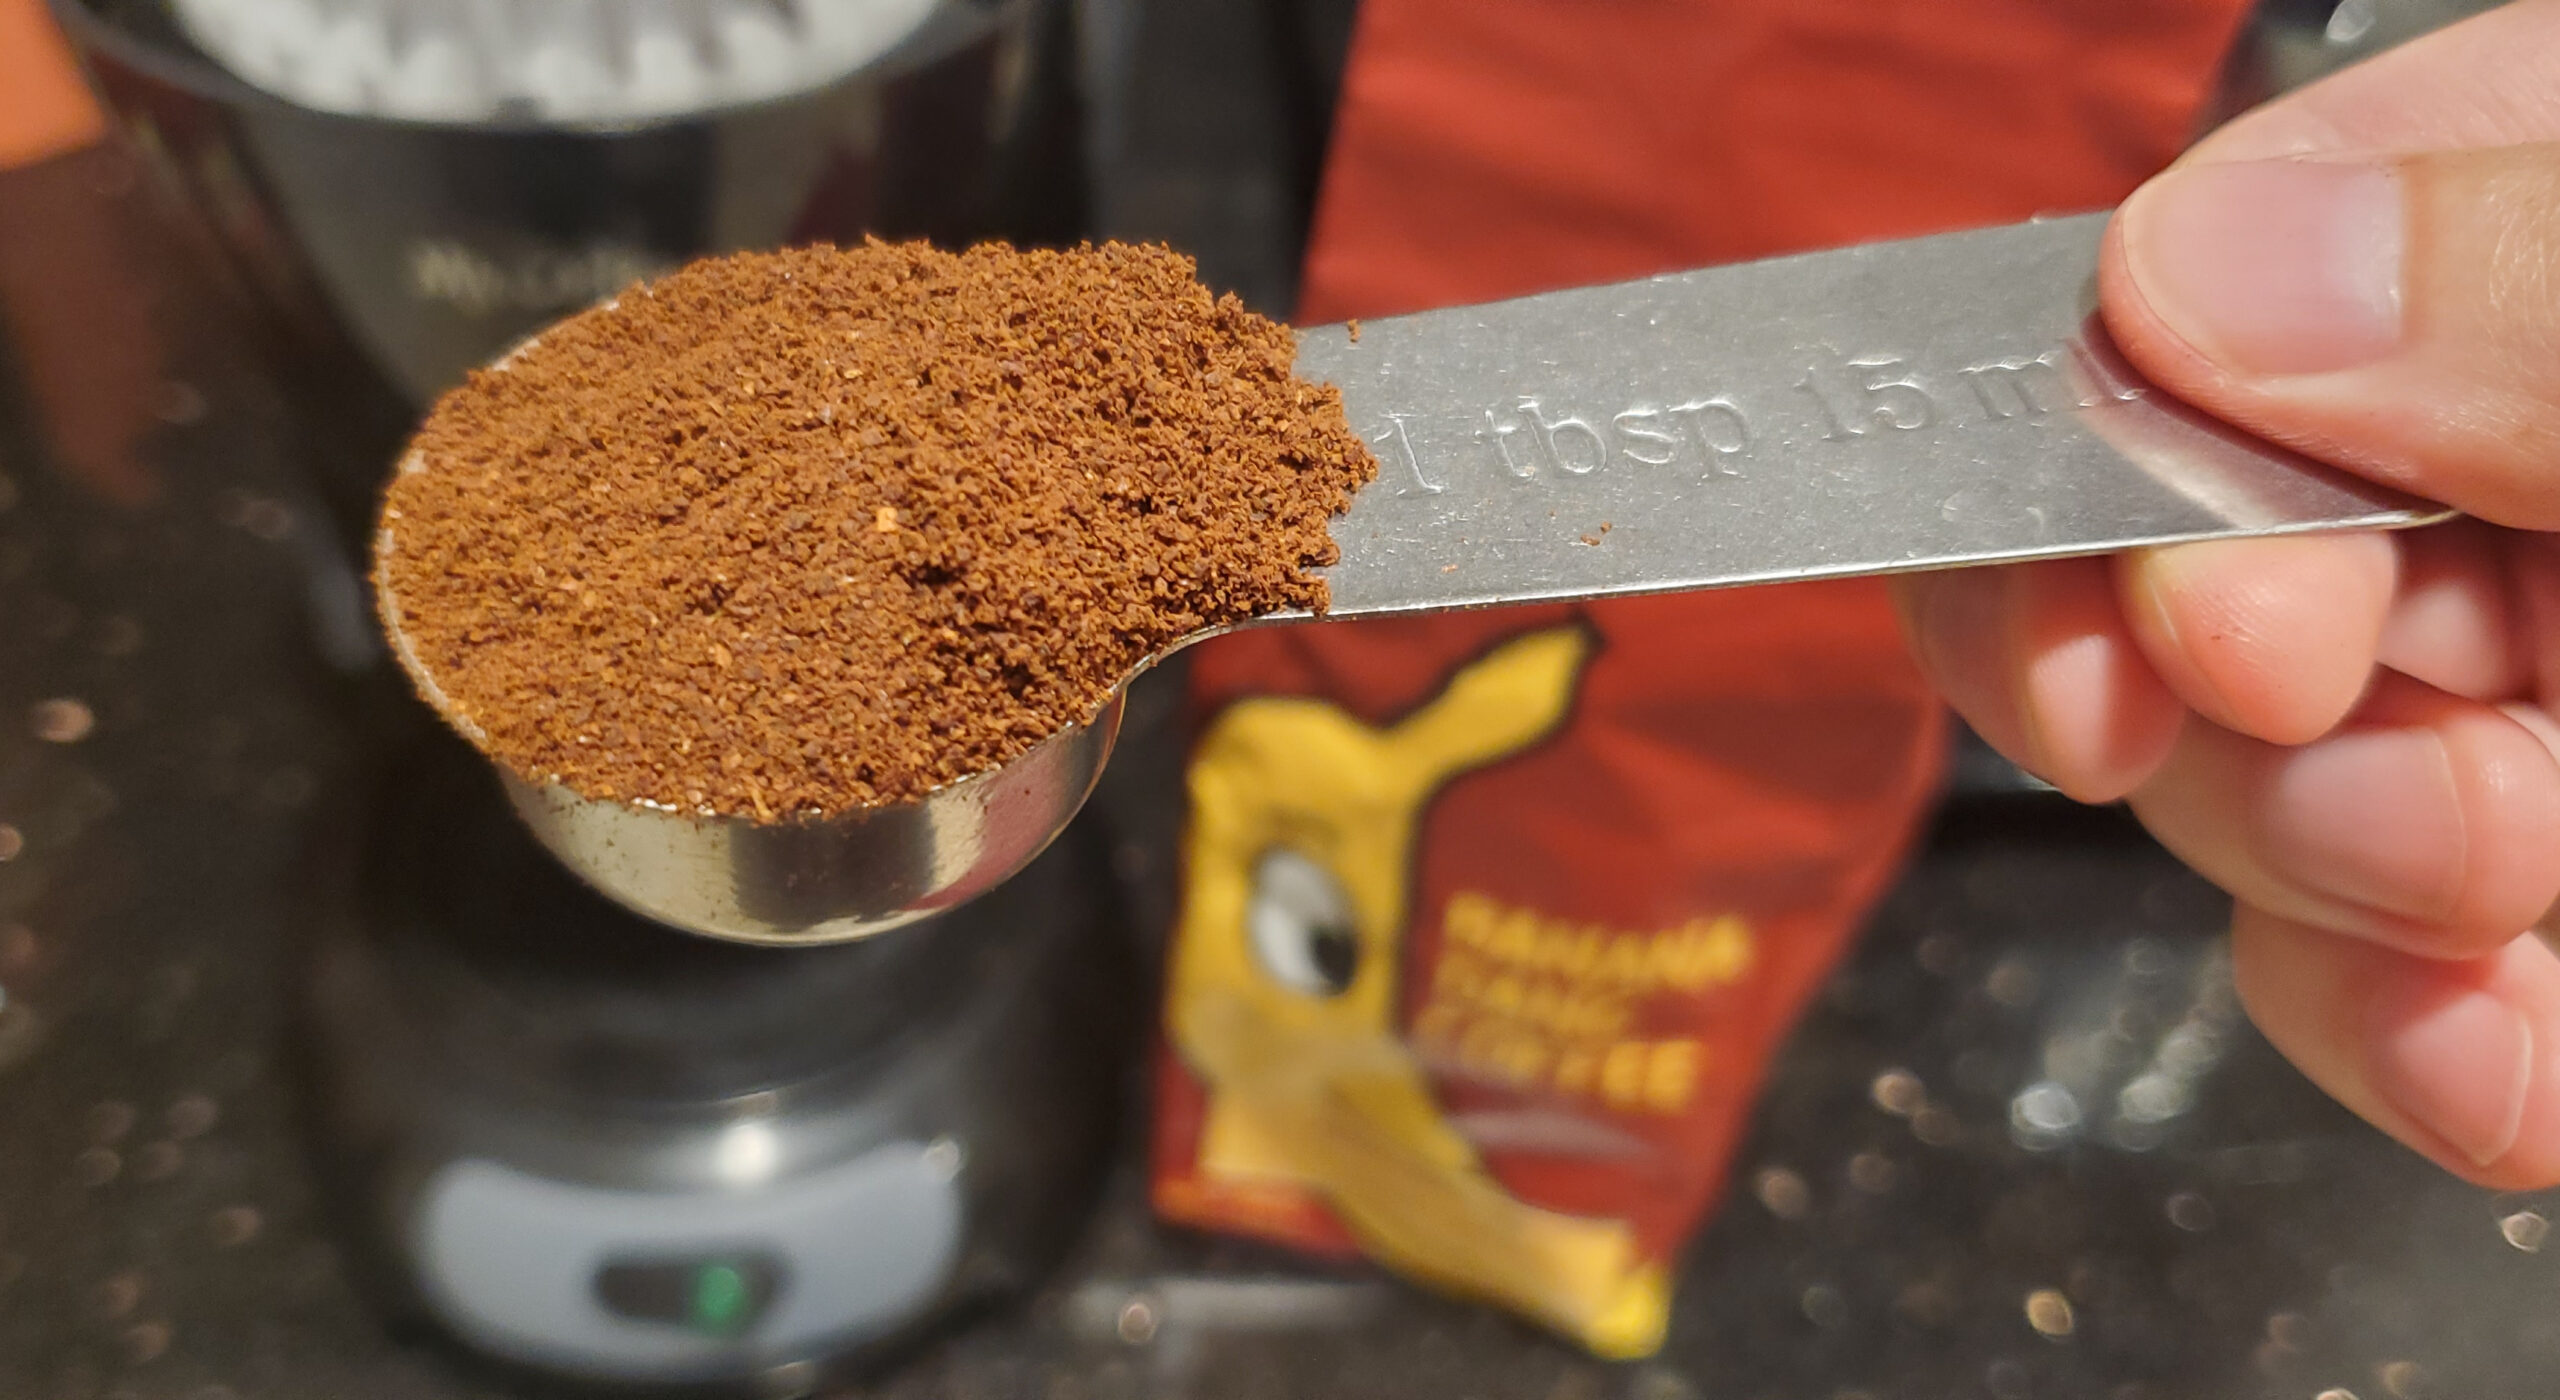 Banana Dang coffee grounds in a tablespoon.